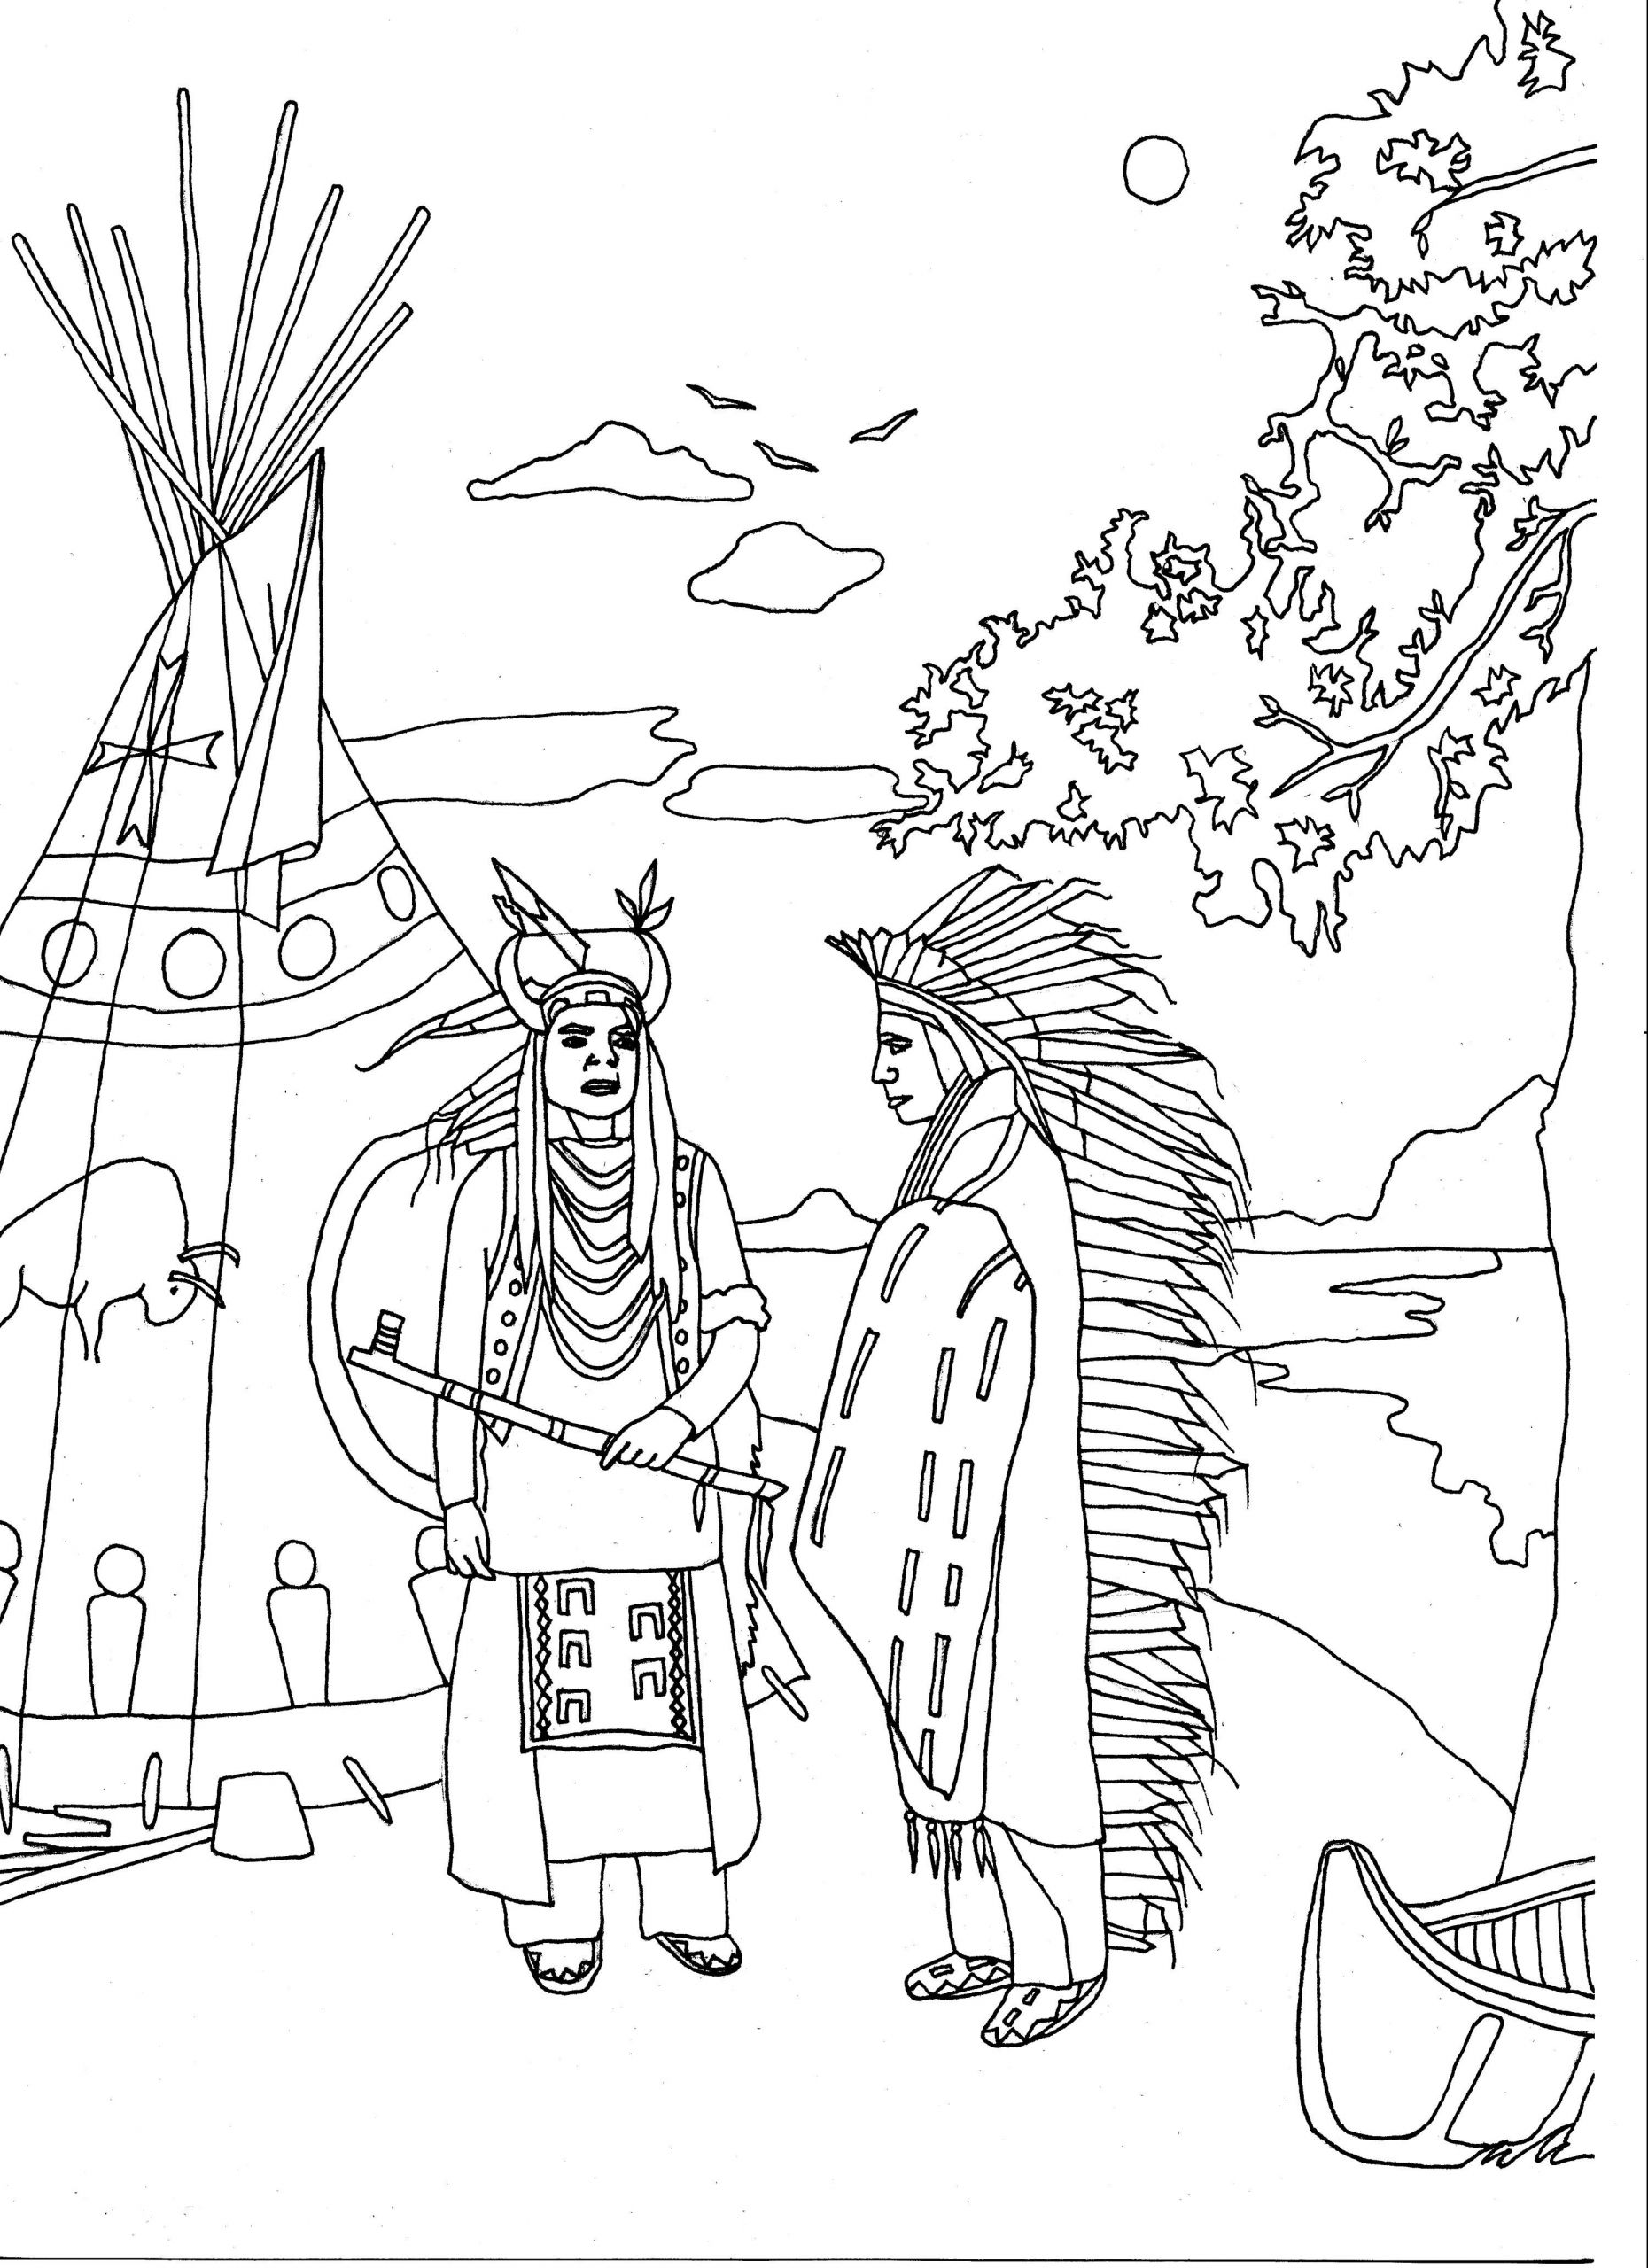 Indian Coloring Pages For Adults
 Two native americans Native American Adult Coloring Pages